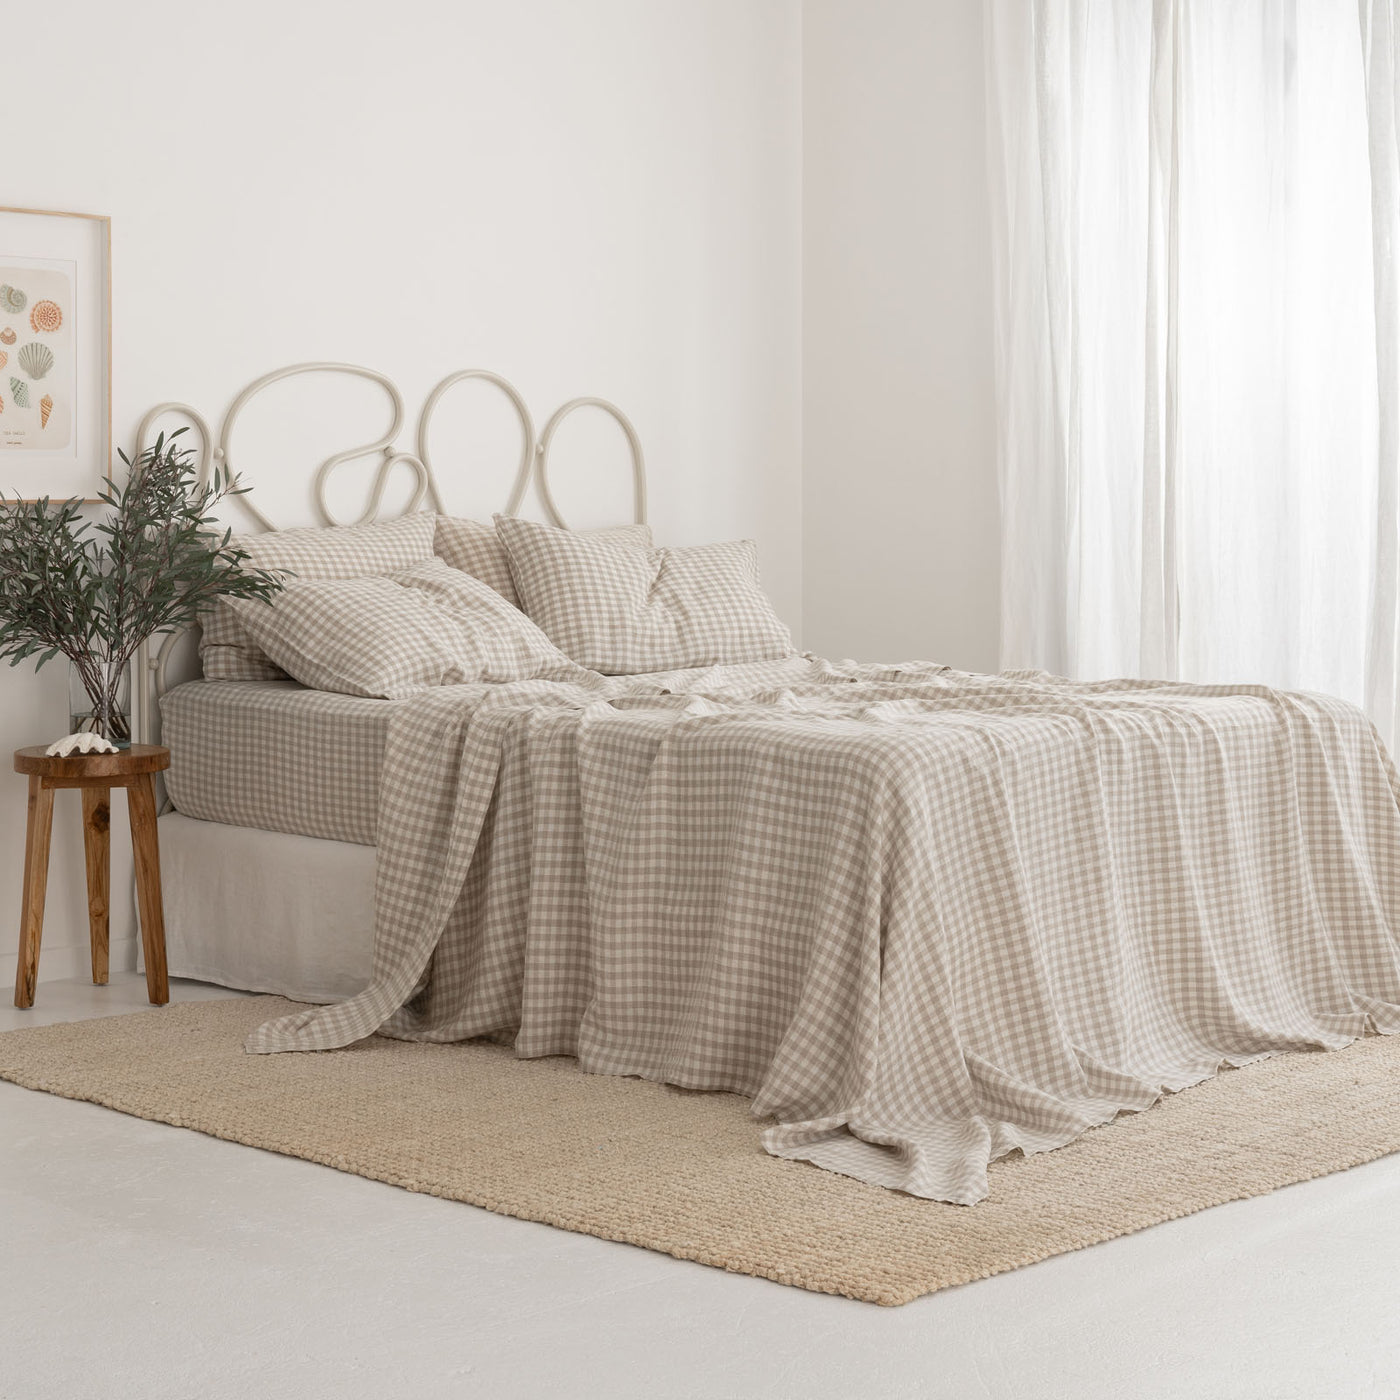 French Flax Linen Flat Sheet in Beige Gingham